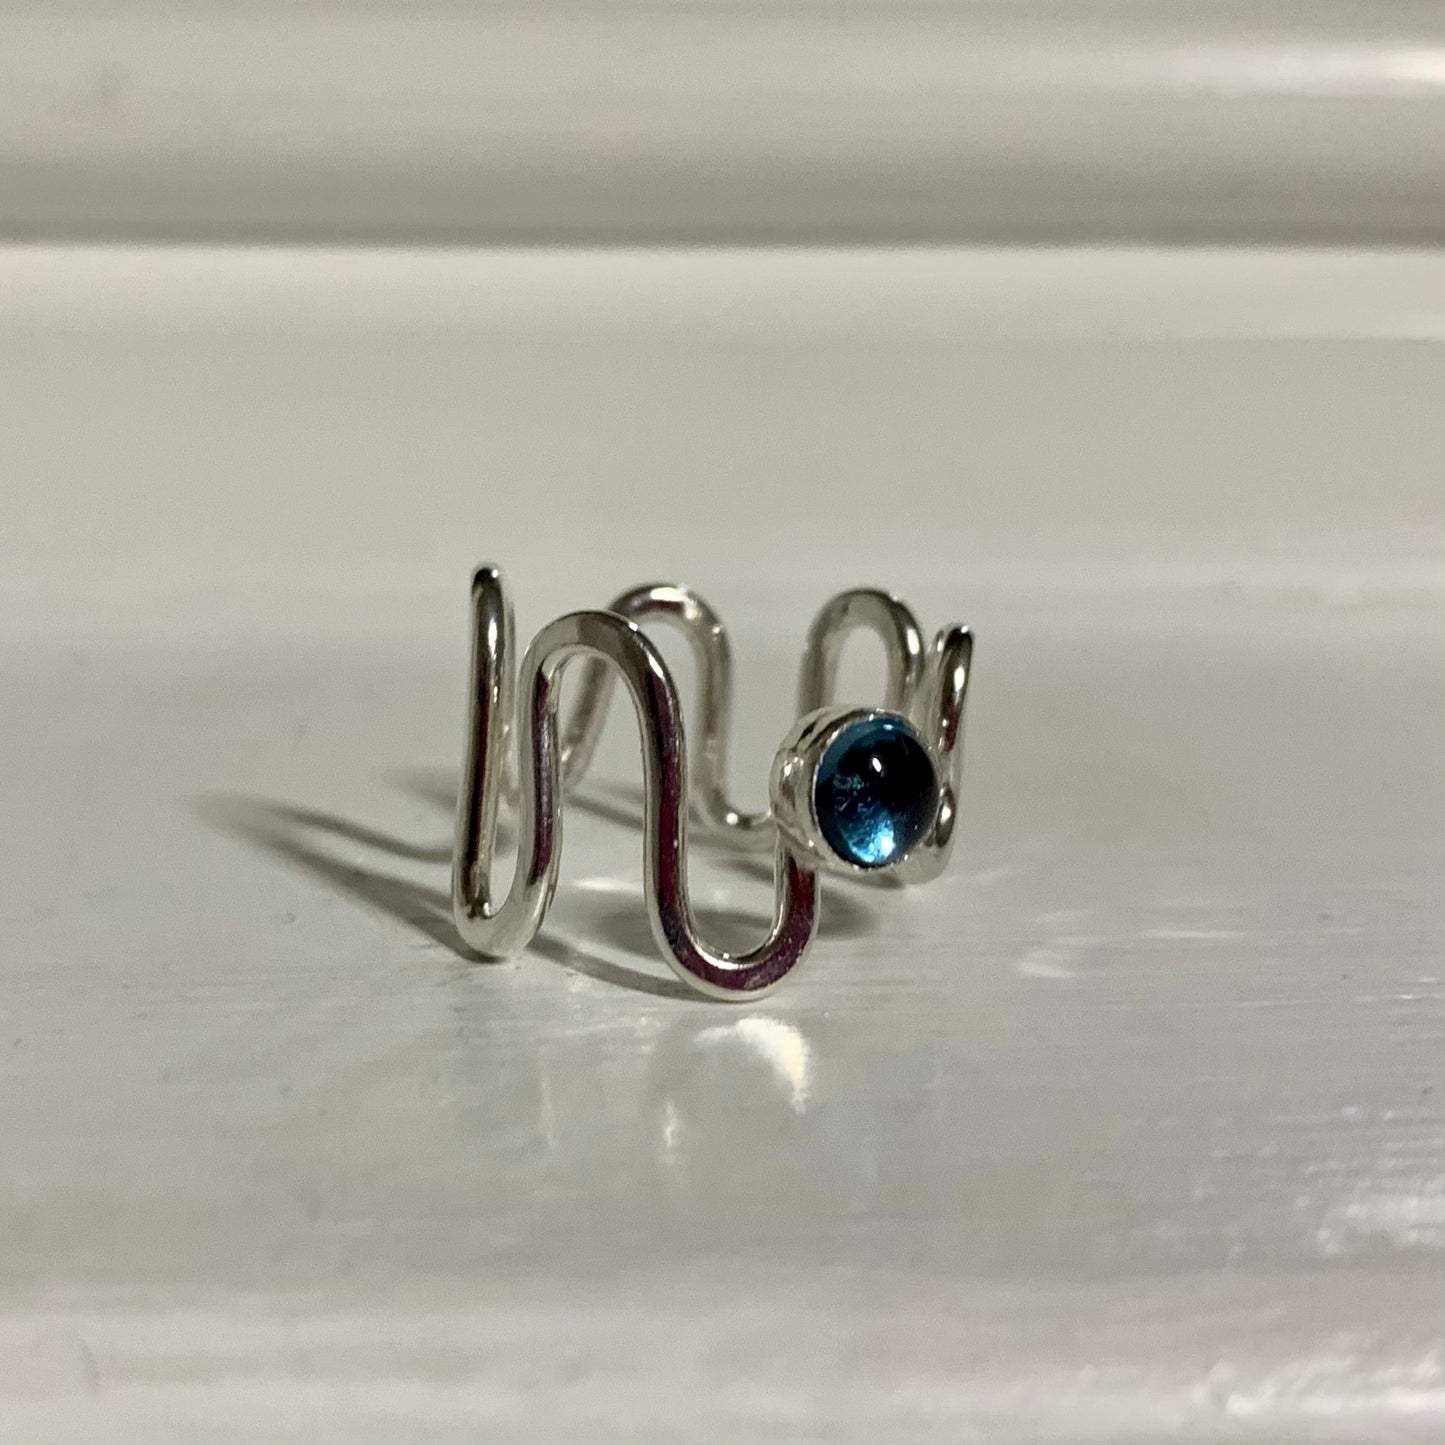 A London blue topaz and sterling silver ripple ring